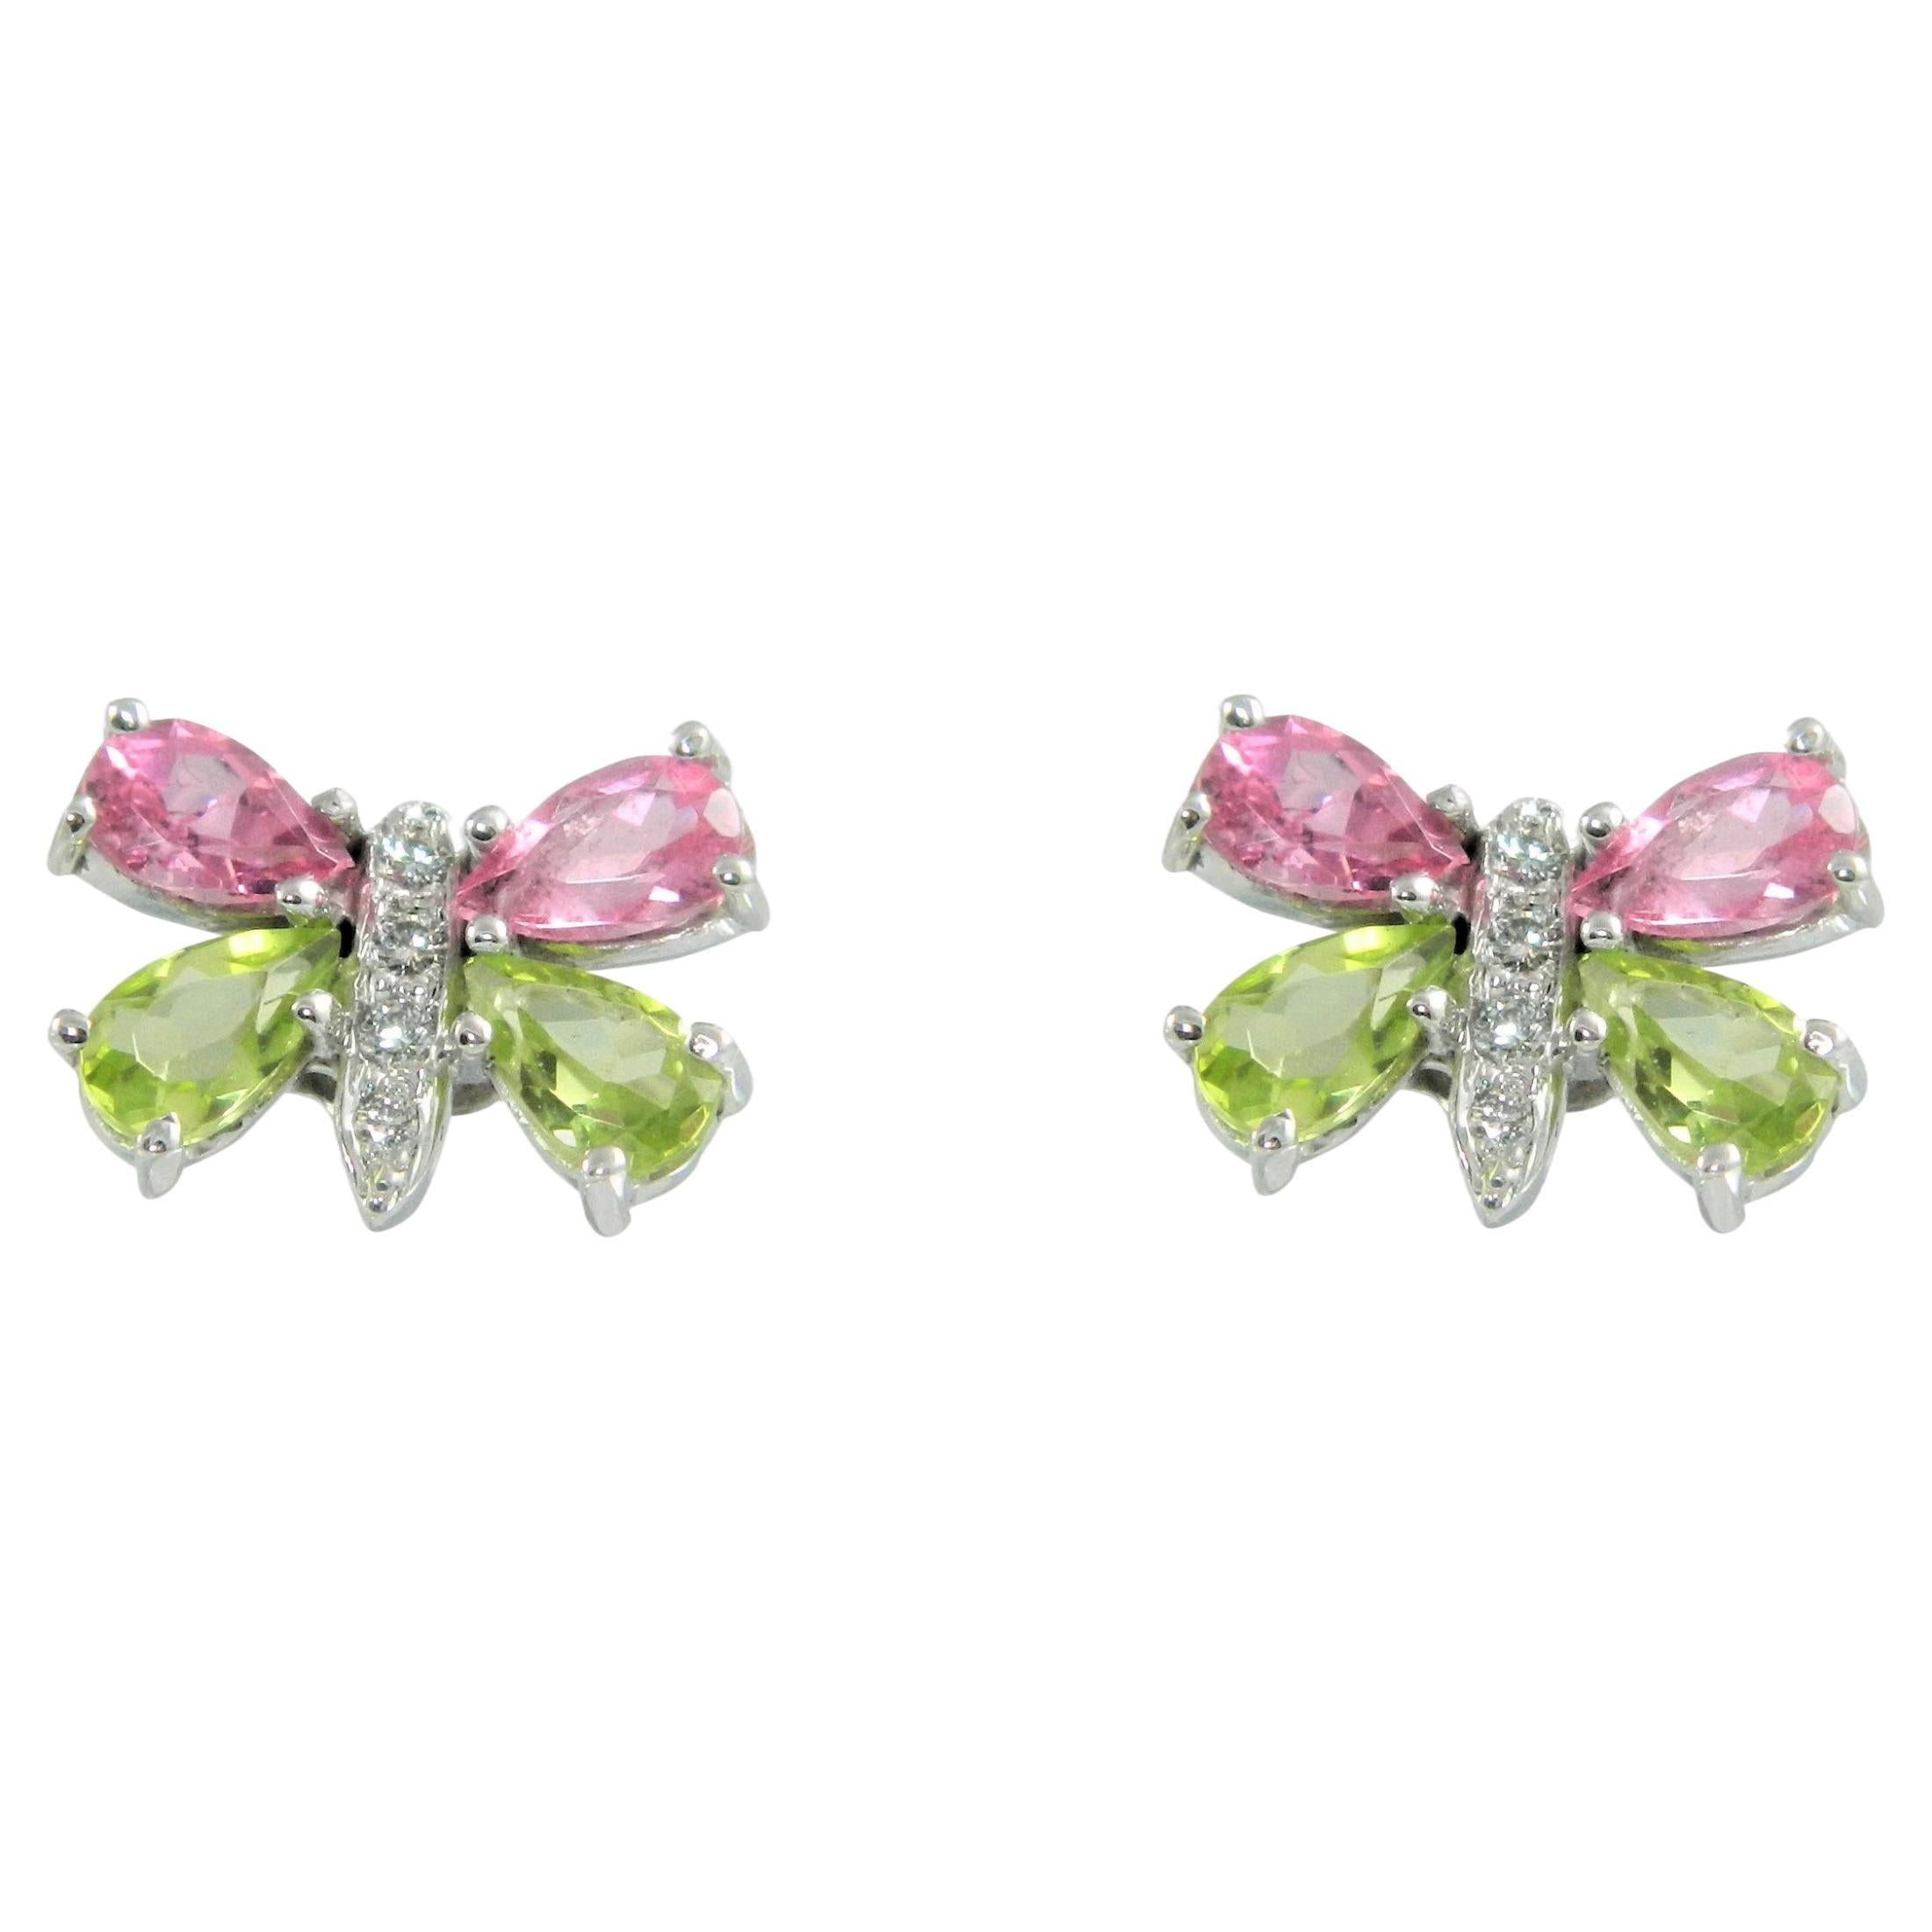 Colorful Butterfly Earrings in 14K White Gold, Peridot and Pink Tourmaline Wings